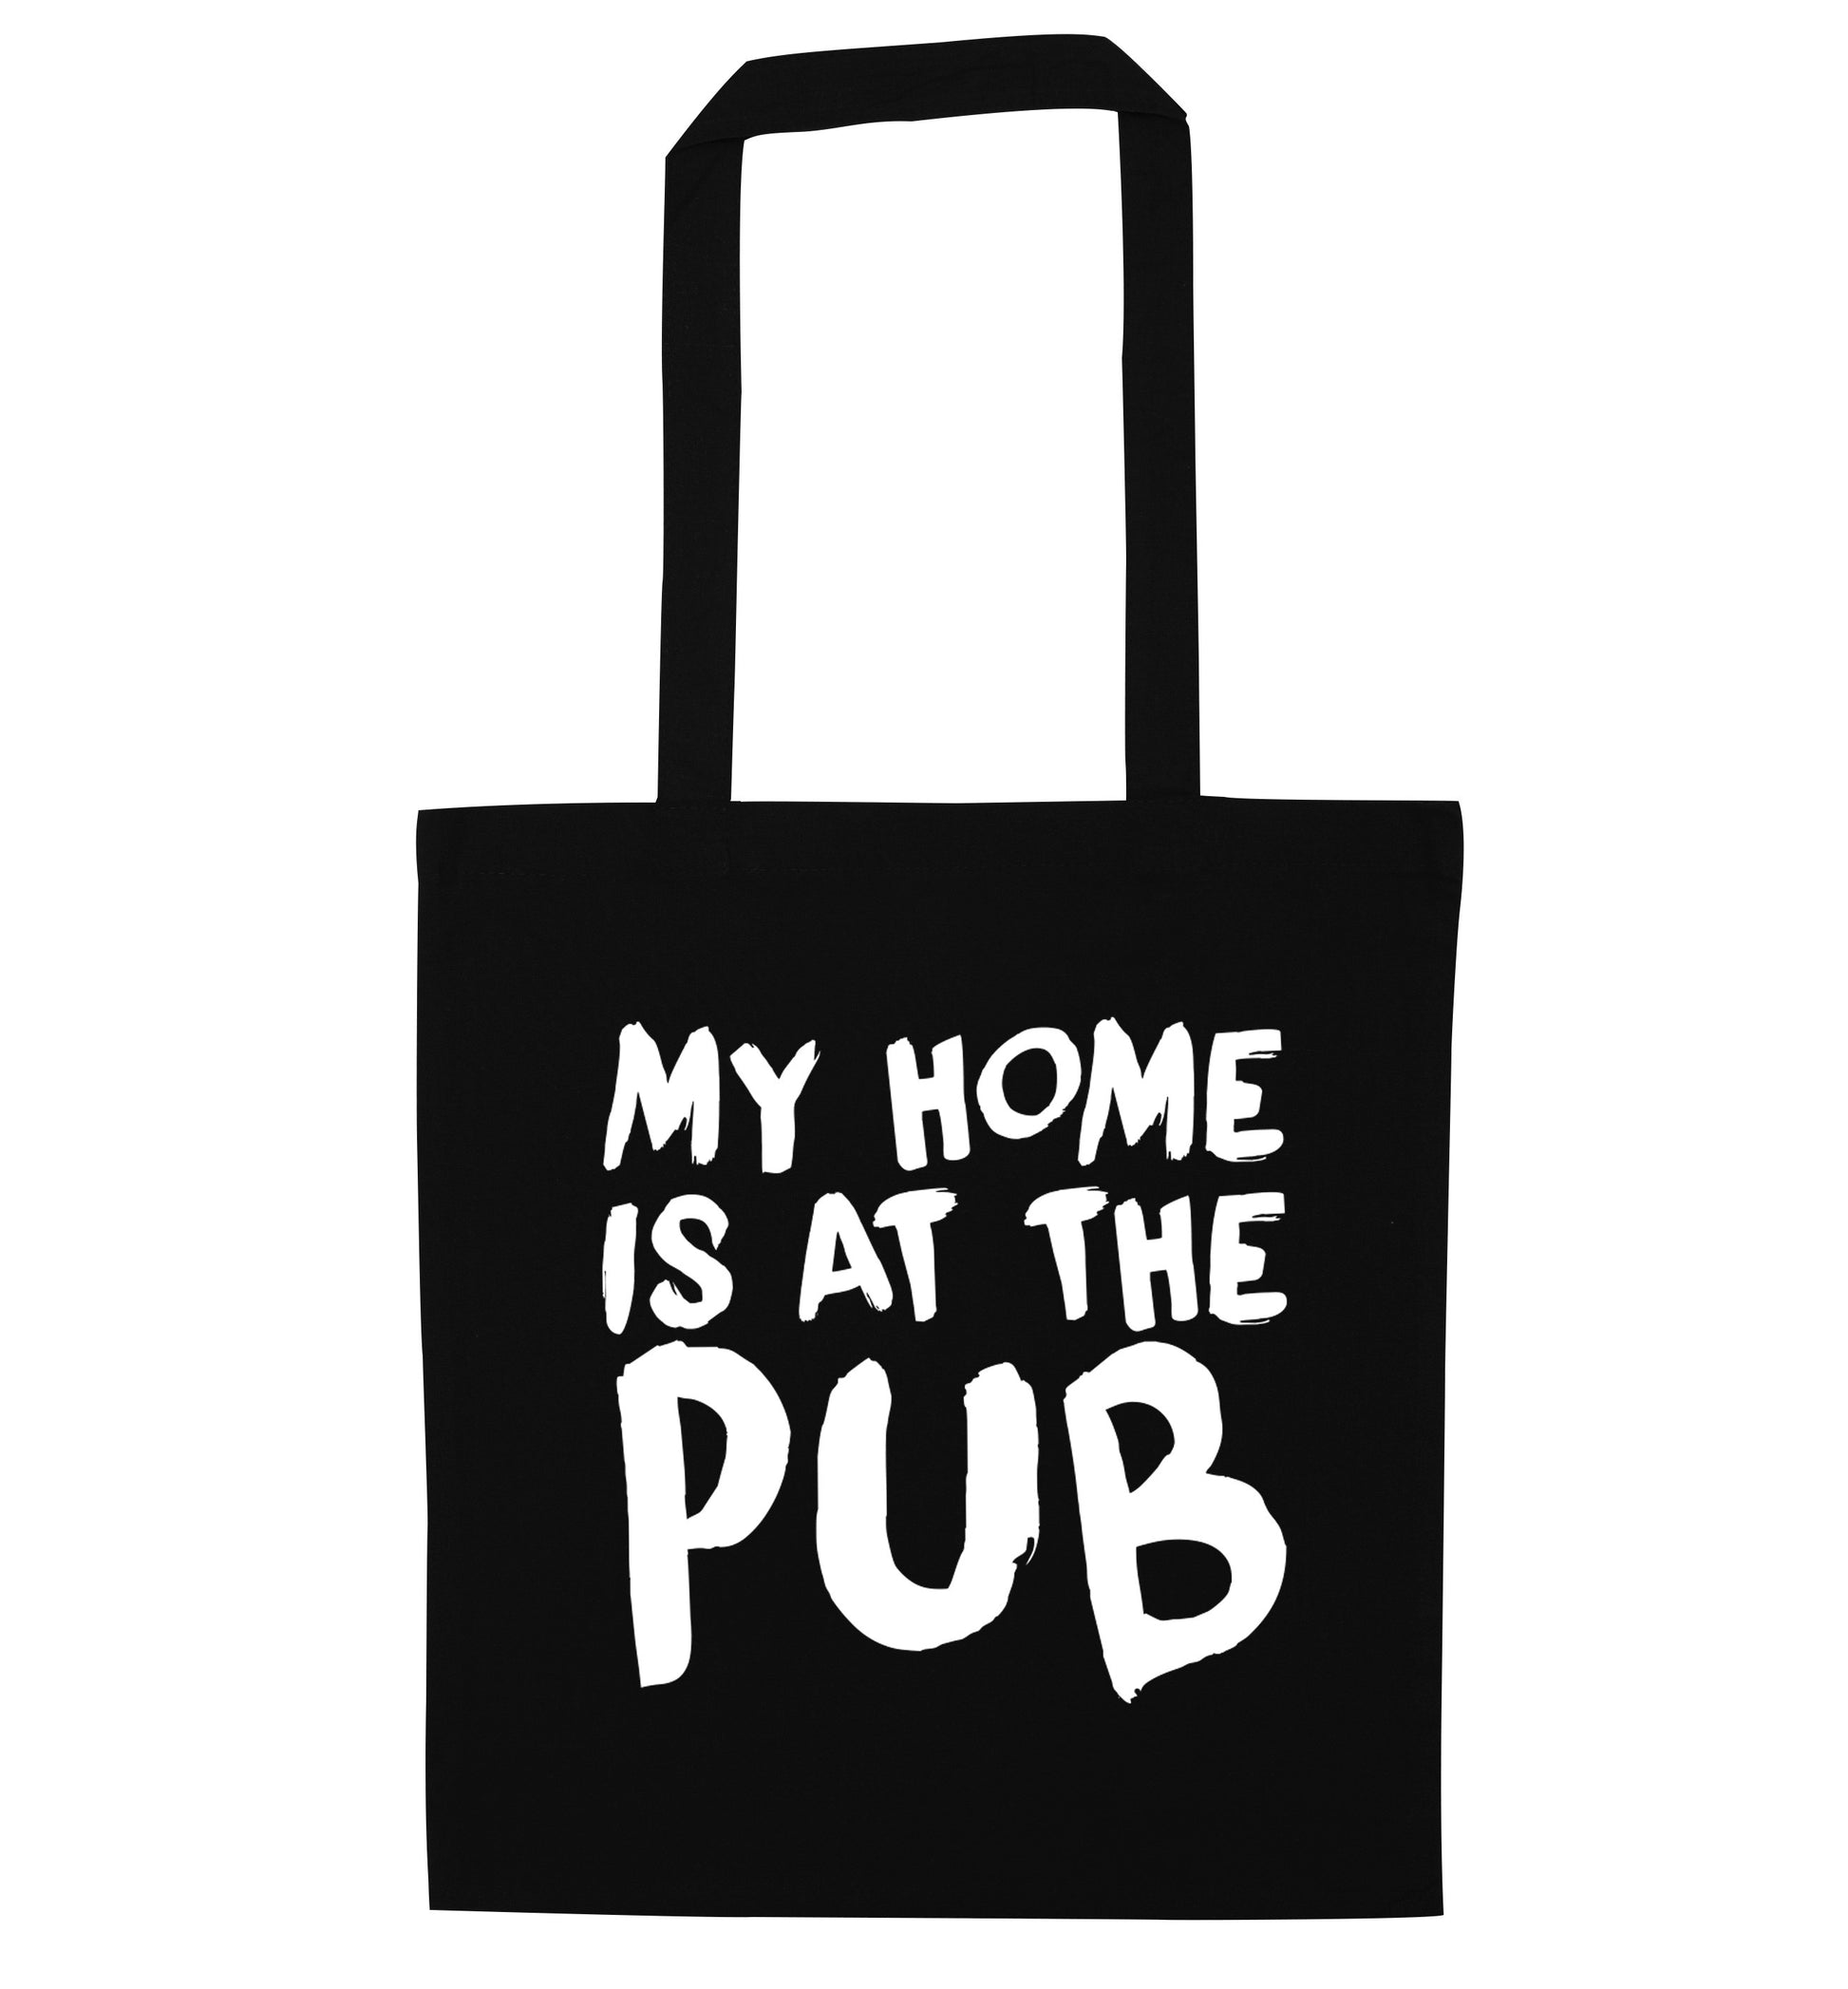 My home is at the pub black tote bag